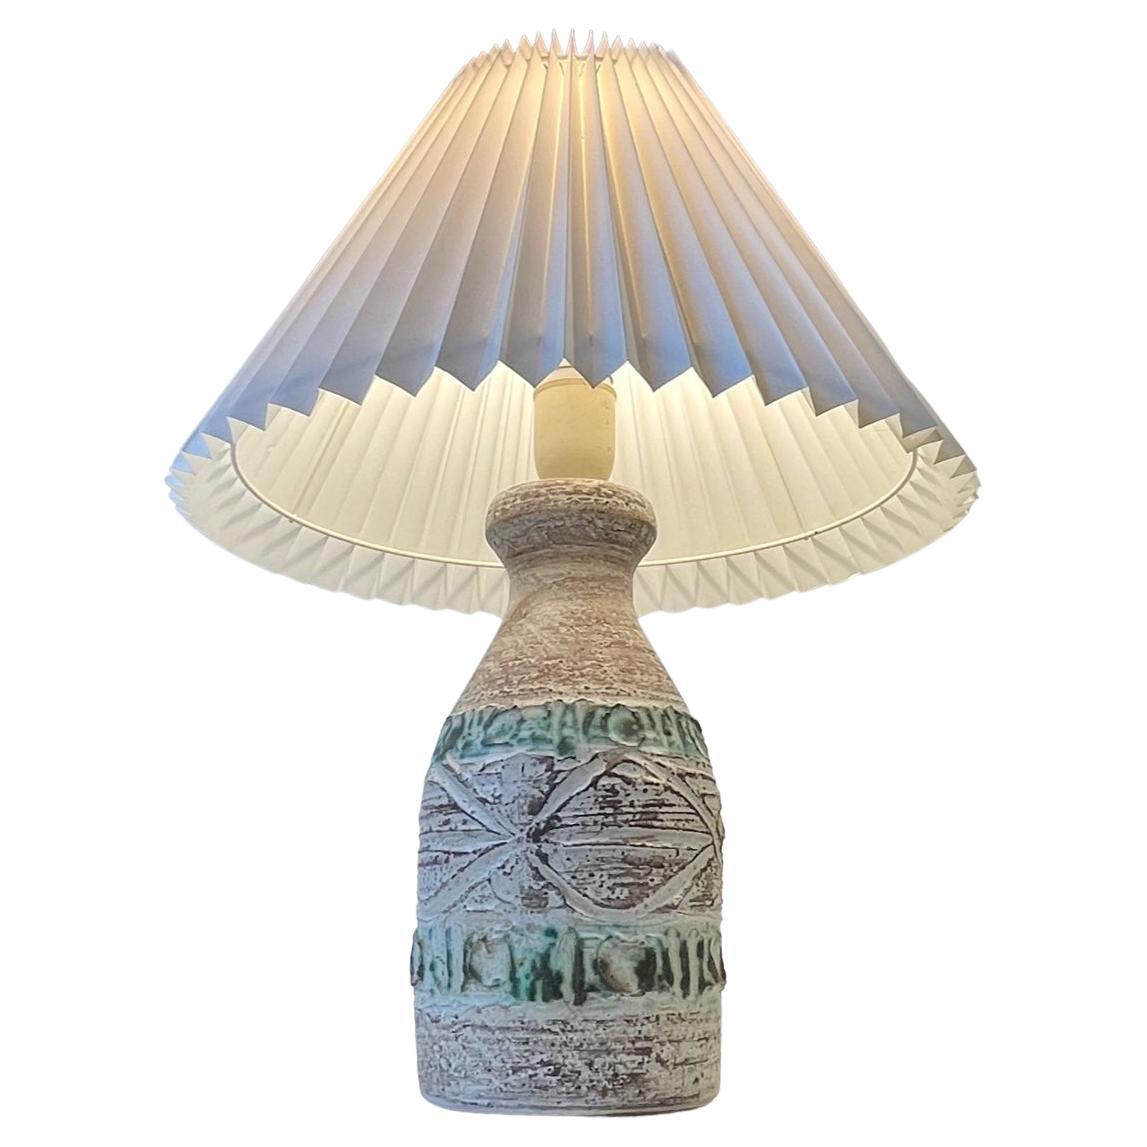 Italian Modern Ceramic Table Lamp with Green Stripes, 1970s